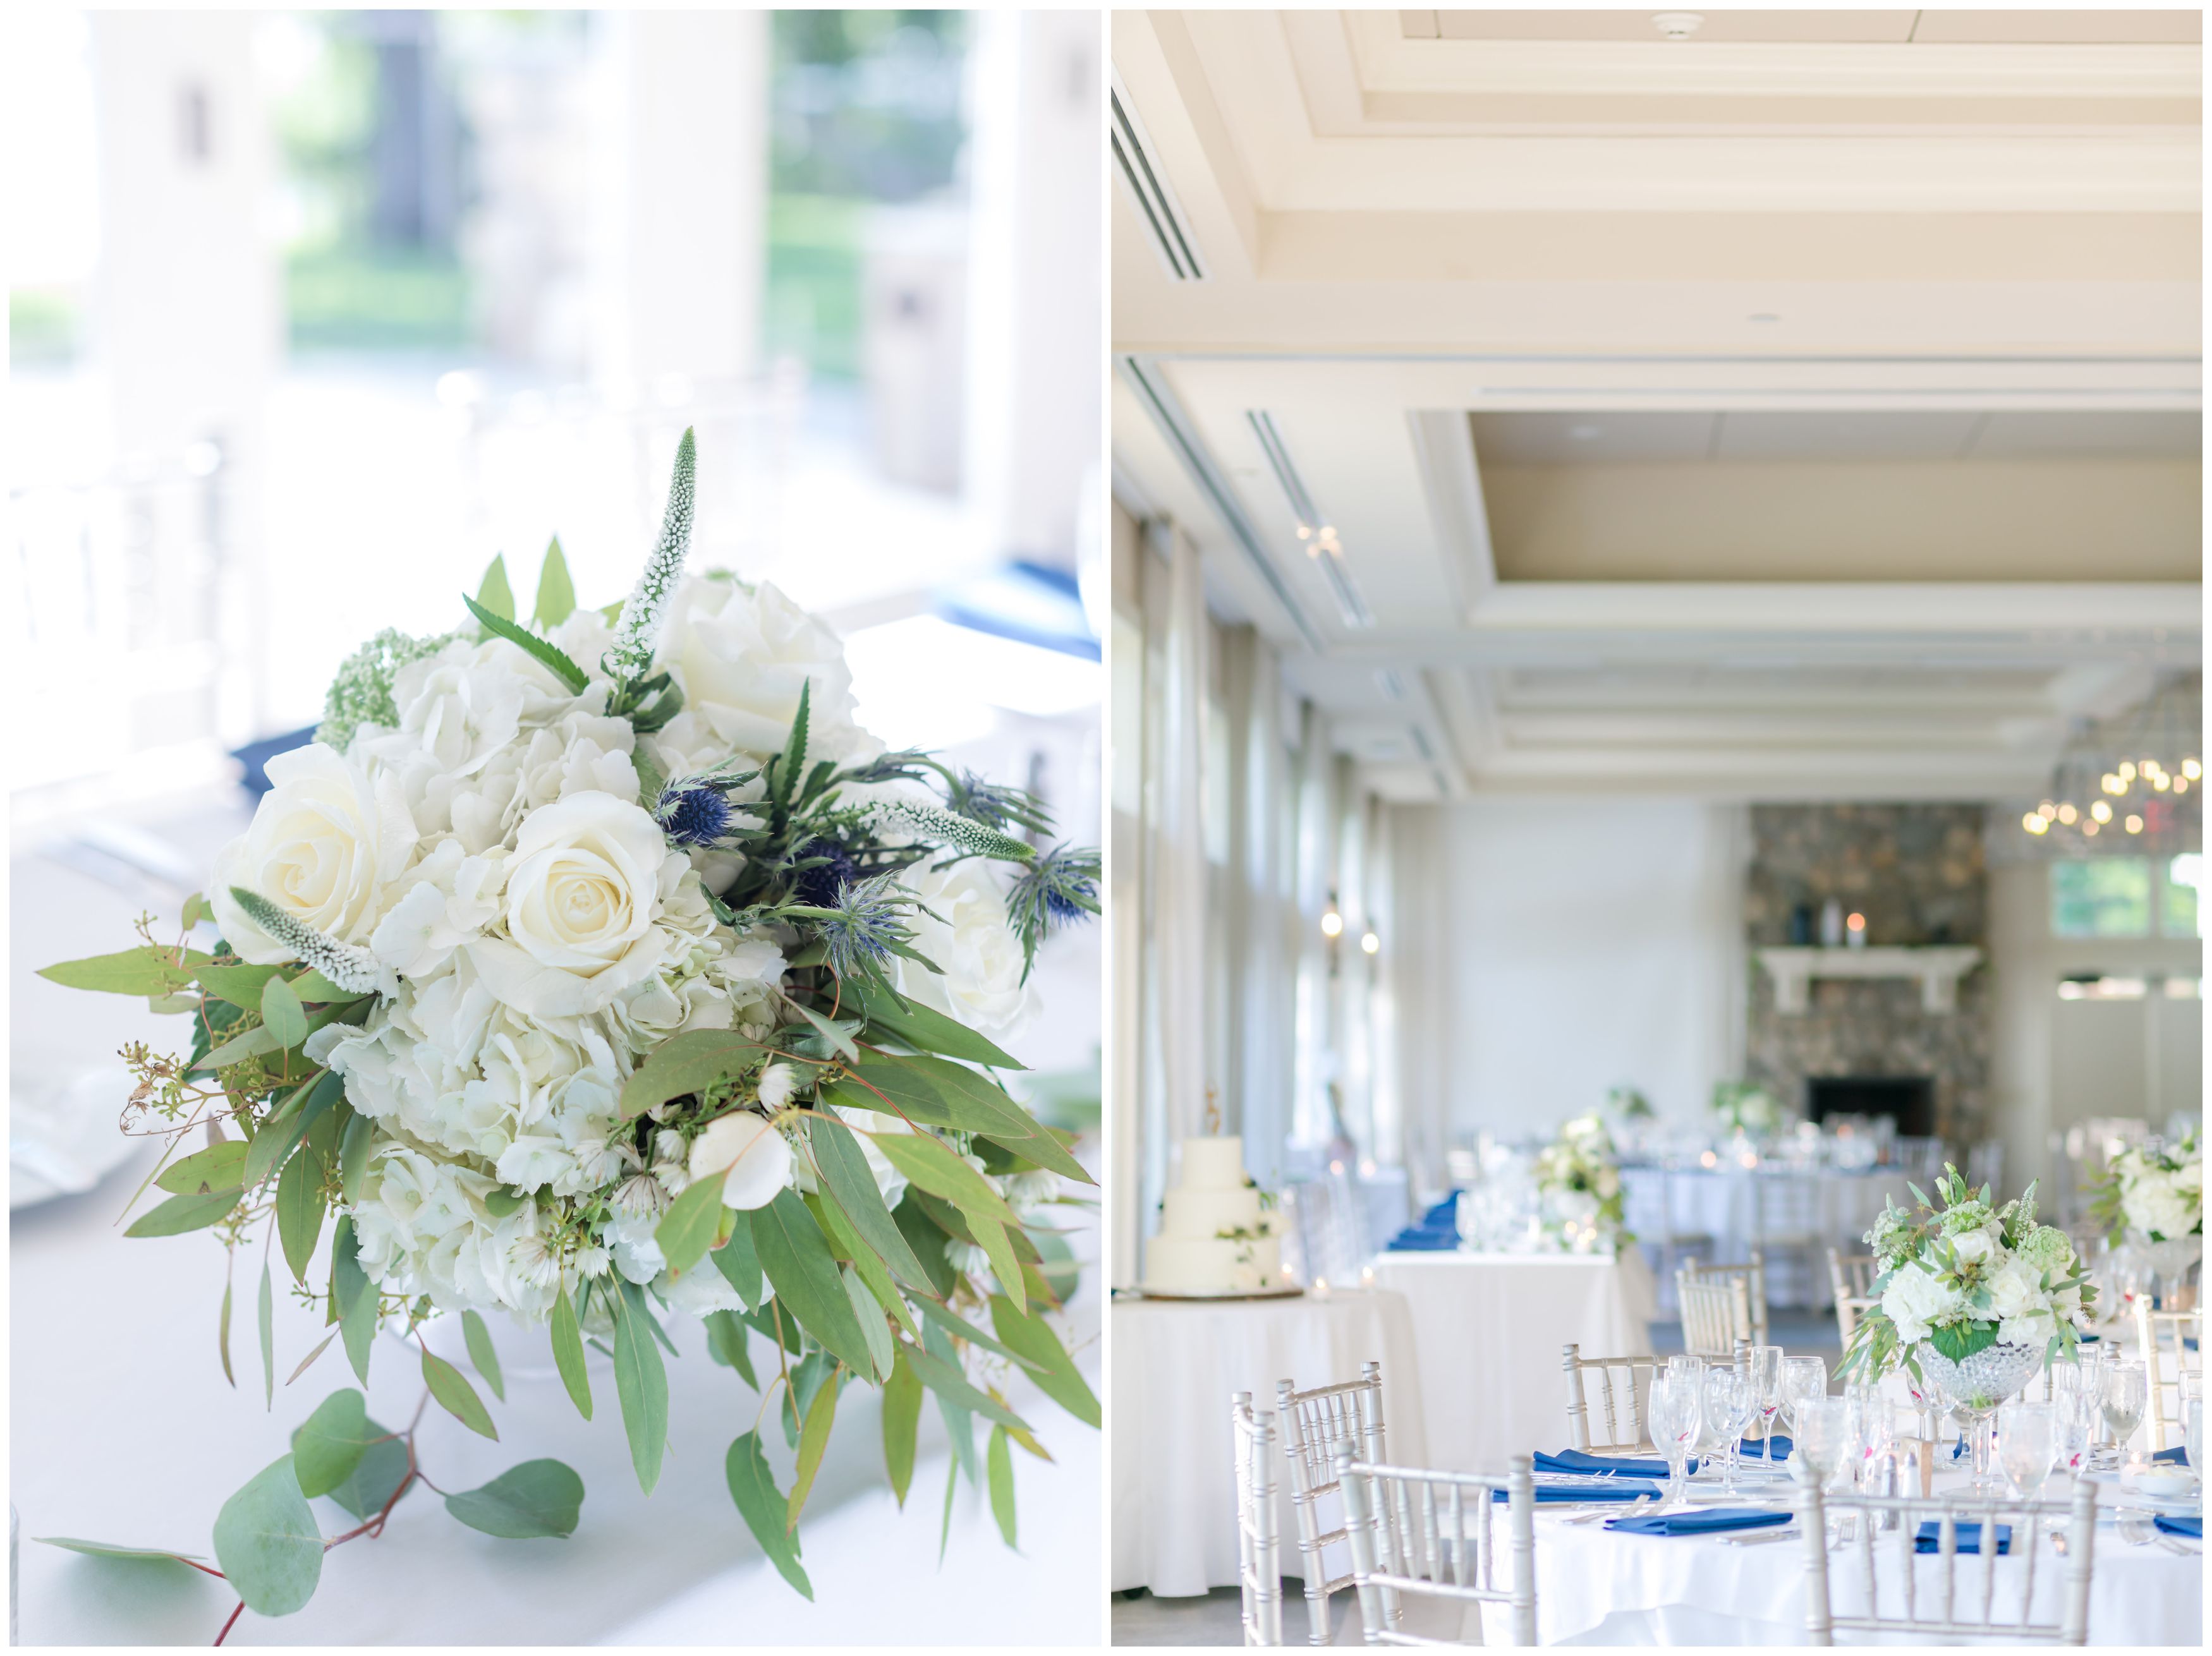 Reception details at Indian Trail Club for elegant white and navy wedding